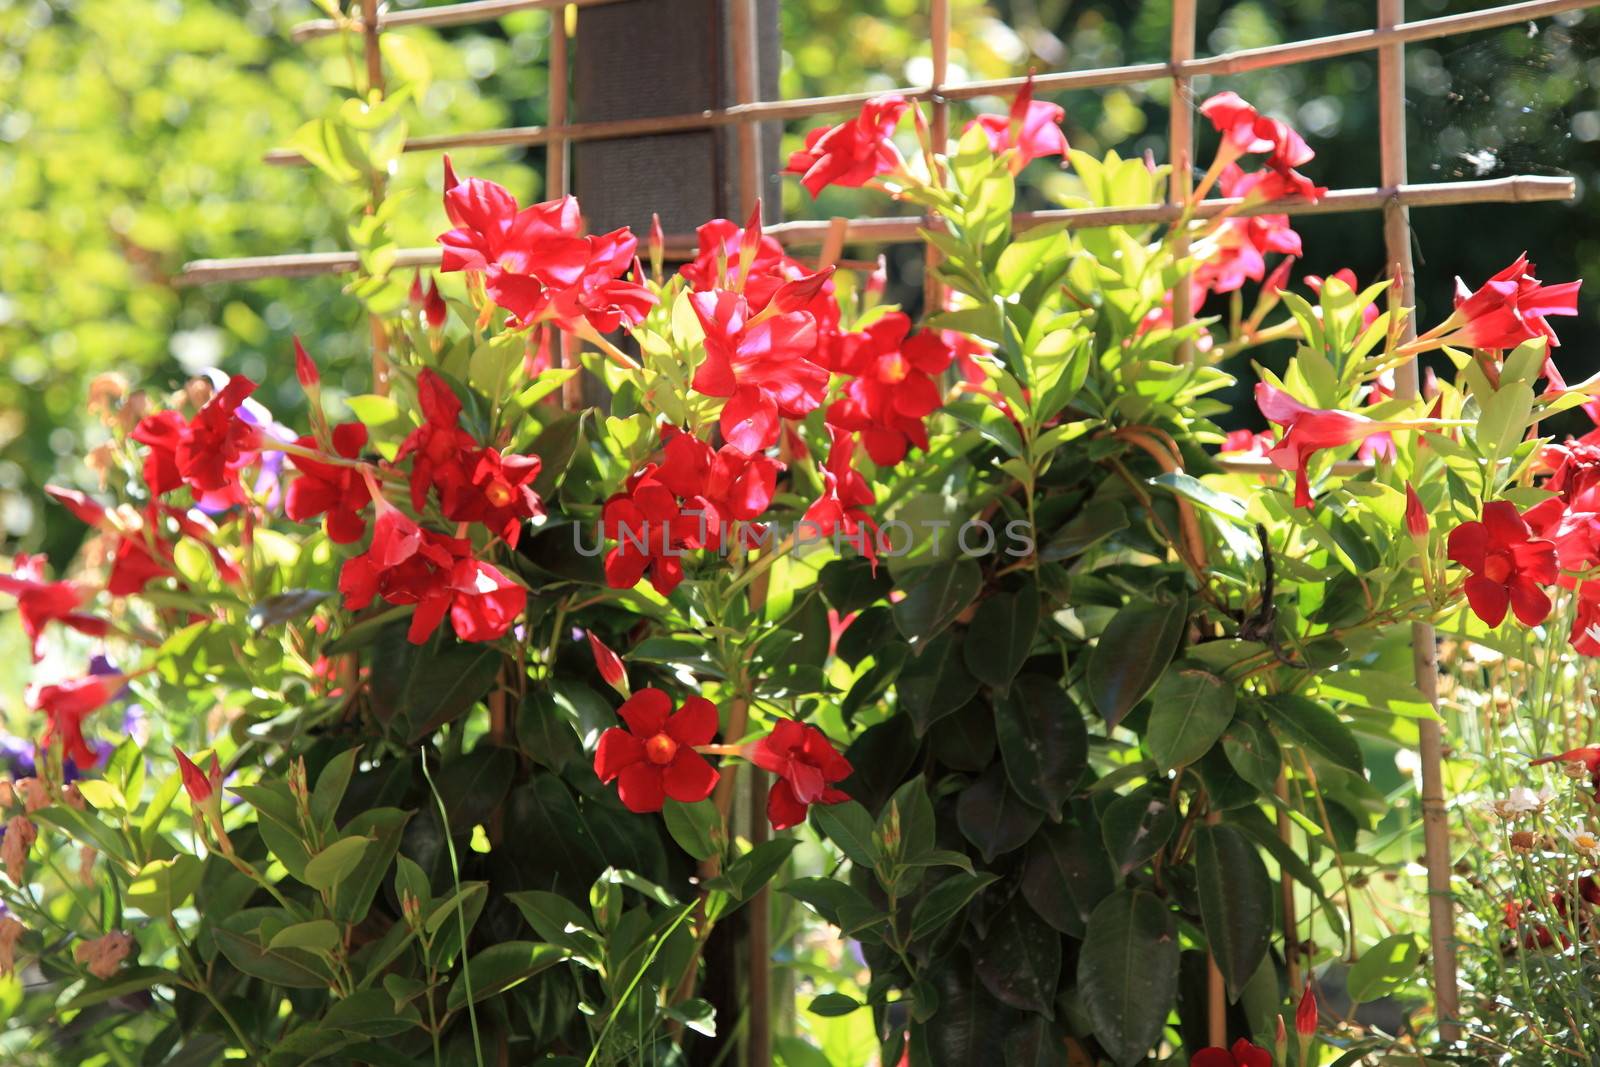 Colourful red summer flowers growing in front of a wooden trellis in the warm sunshine on two small bushes